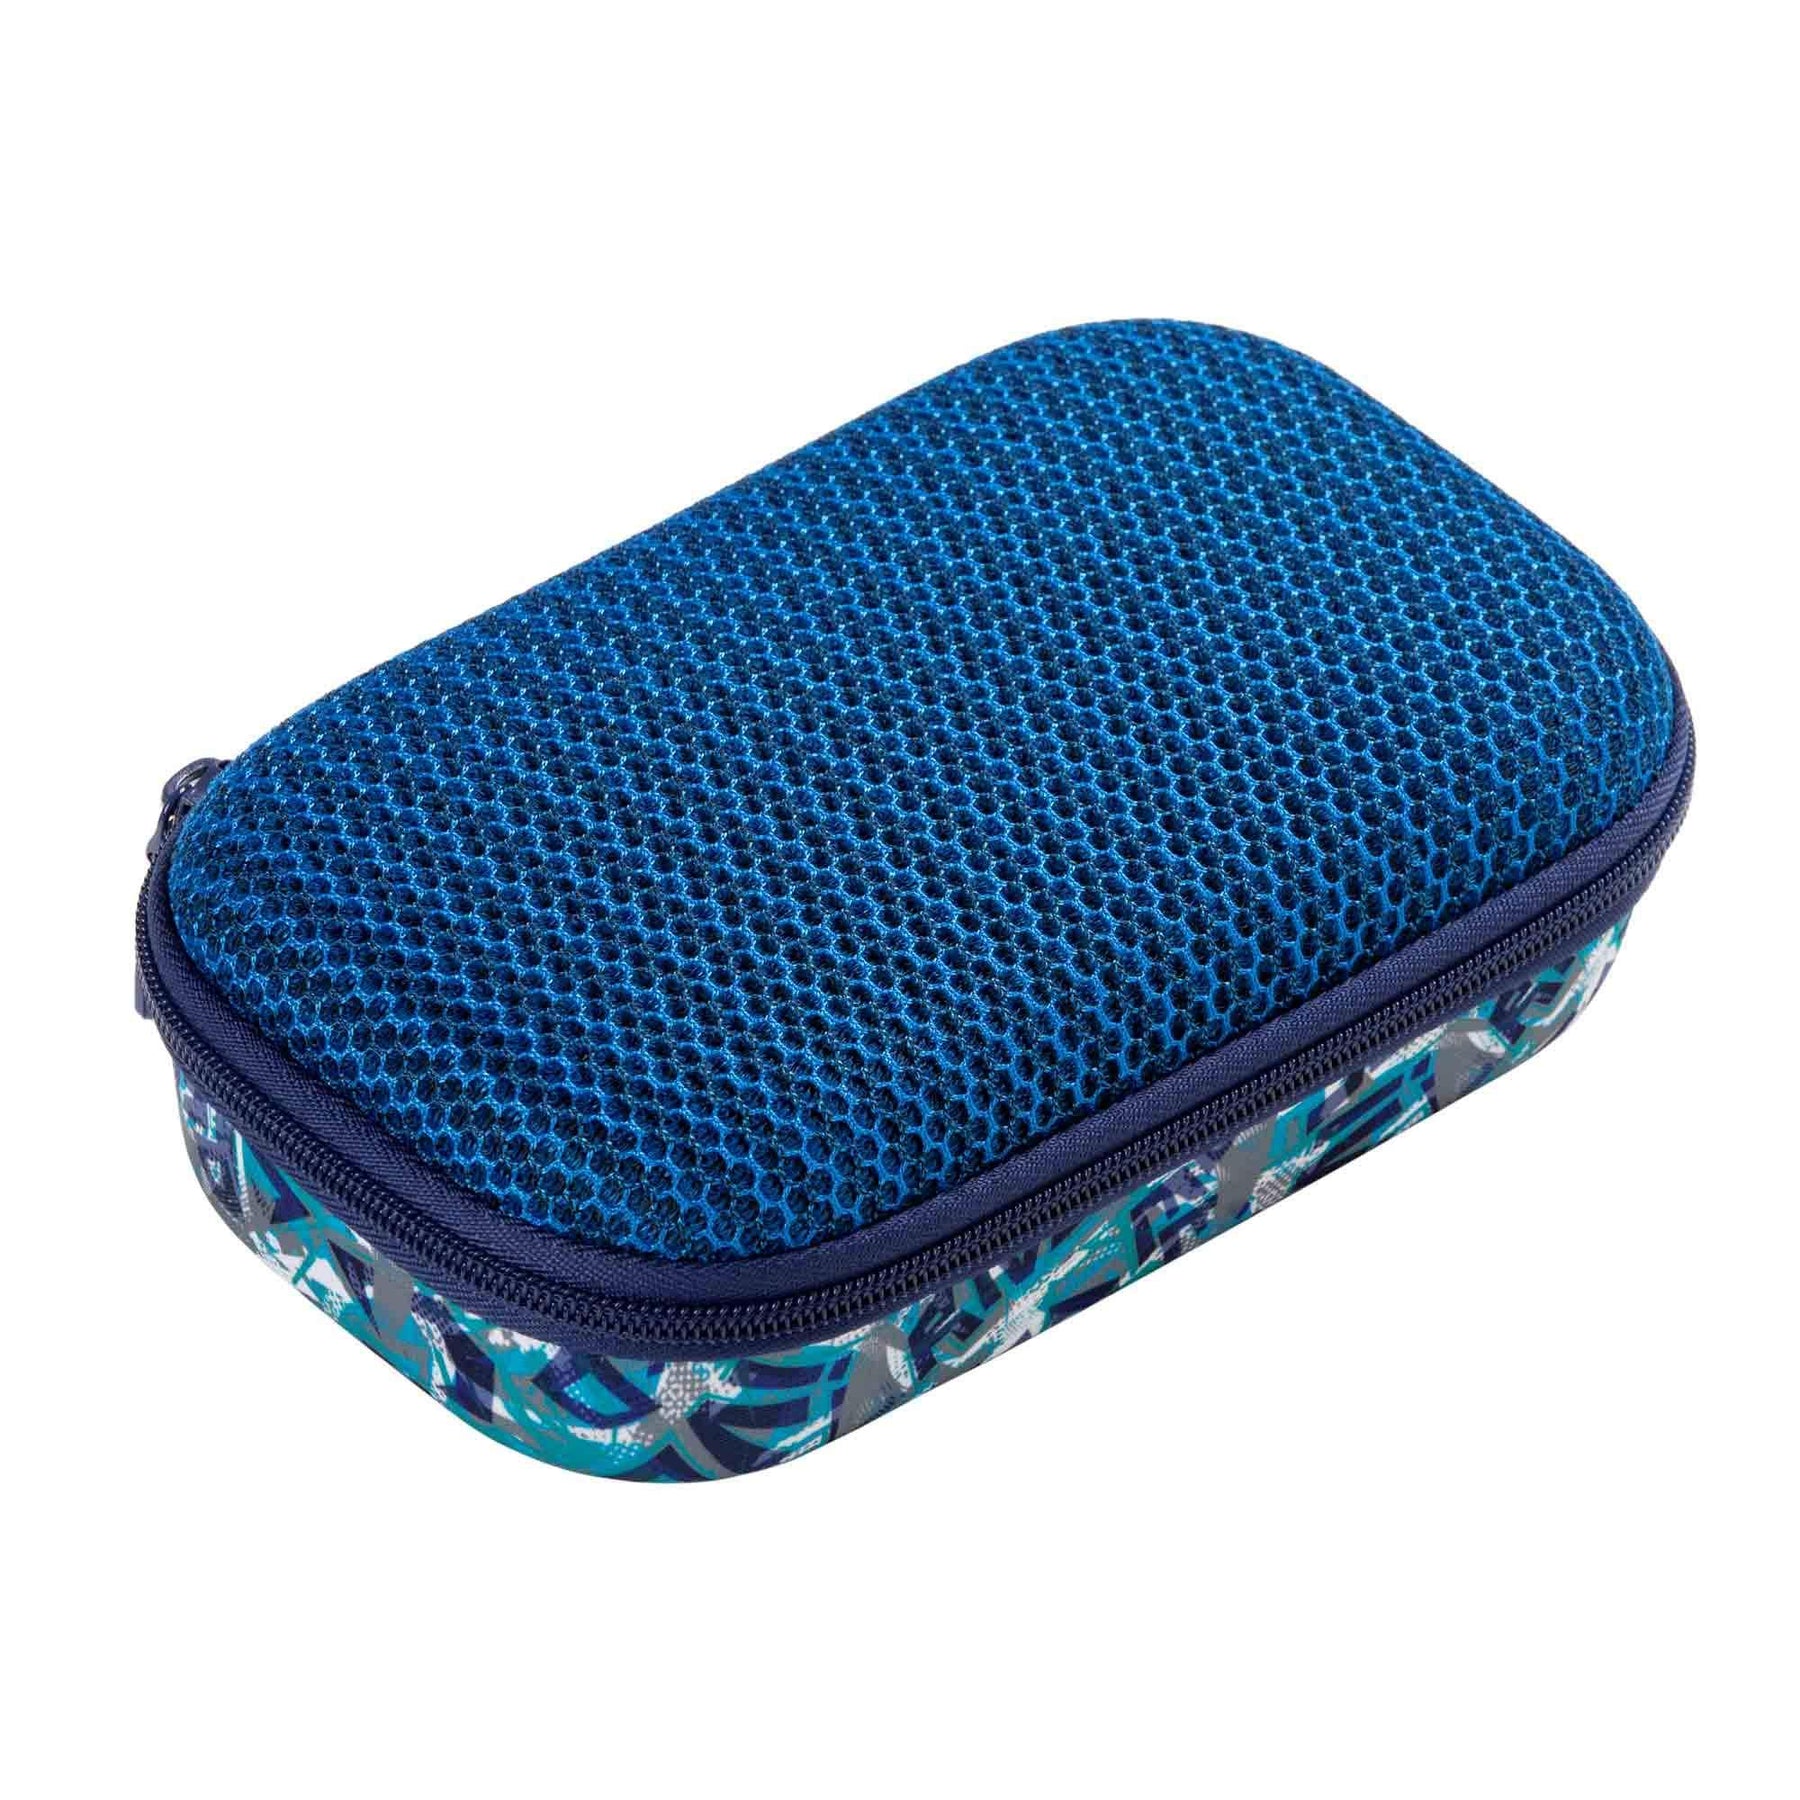 Review for ZIPIT Colorz Large Pencil Box for Boys, Holds Up to 60